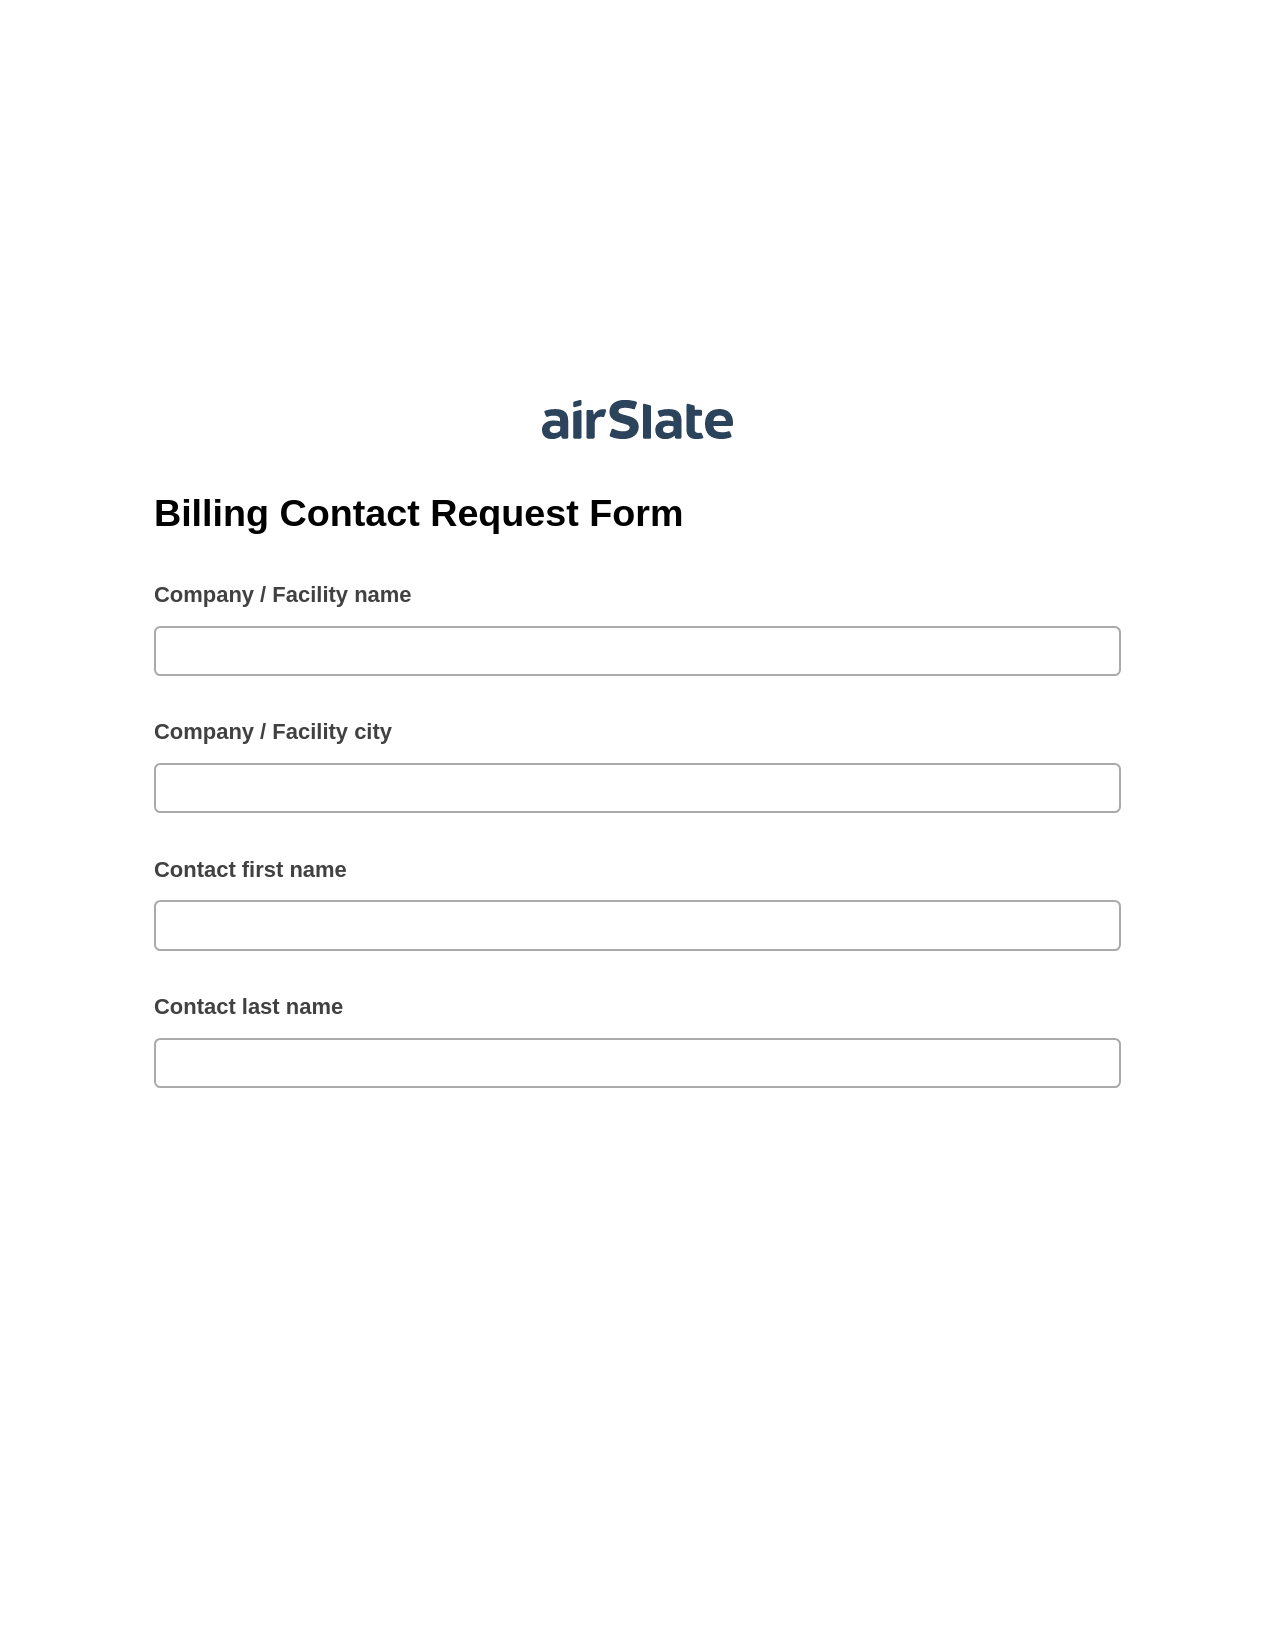 Multirole Billing Contact Request Form Pre-fill Dropdowns from Smartsheet Bot, Reminder Bot, Export to NetSuite Record Bot